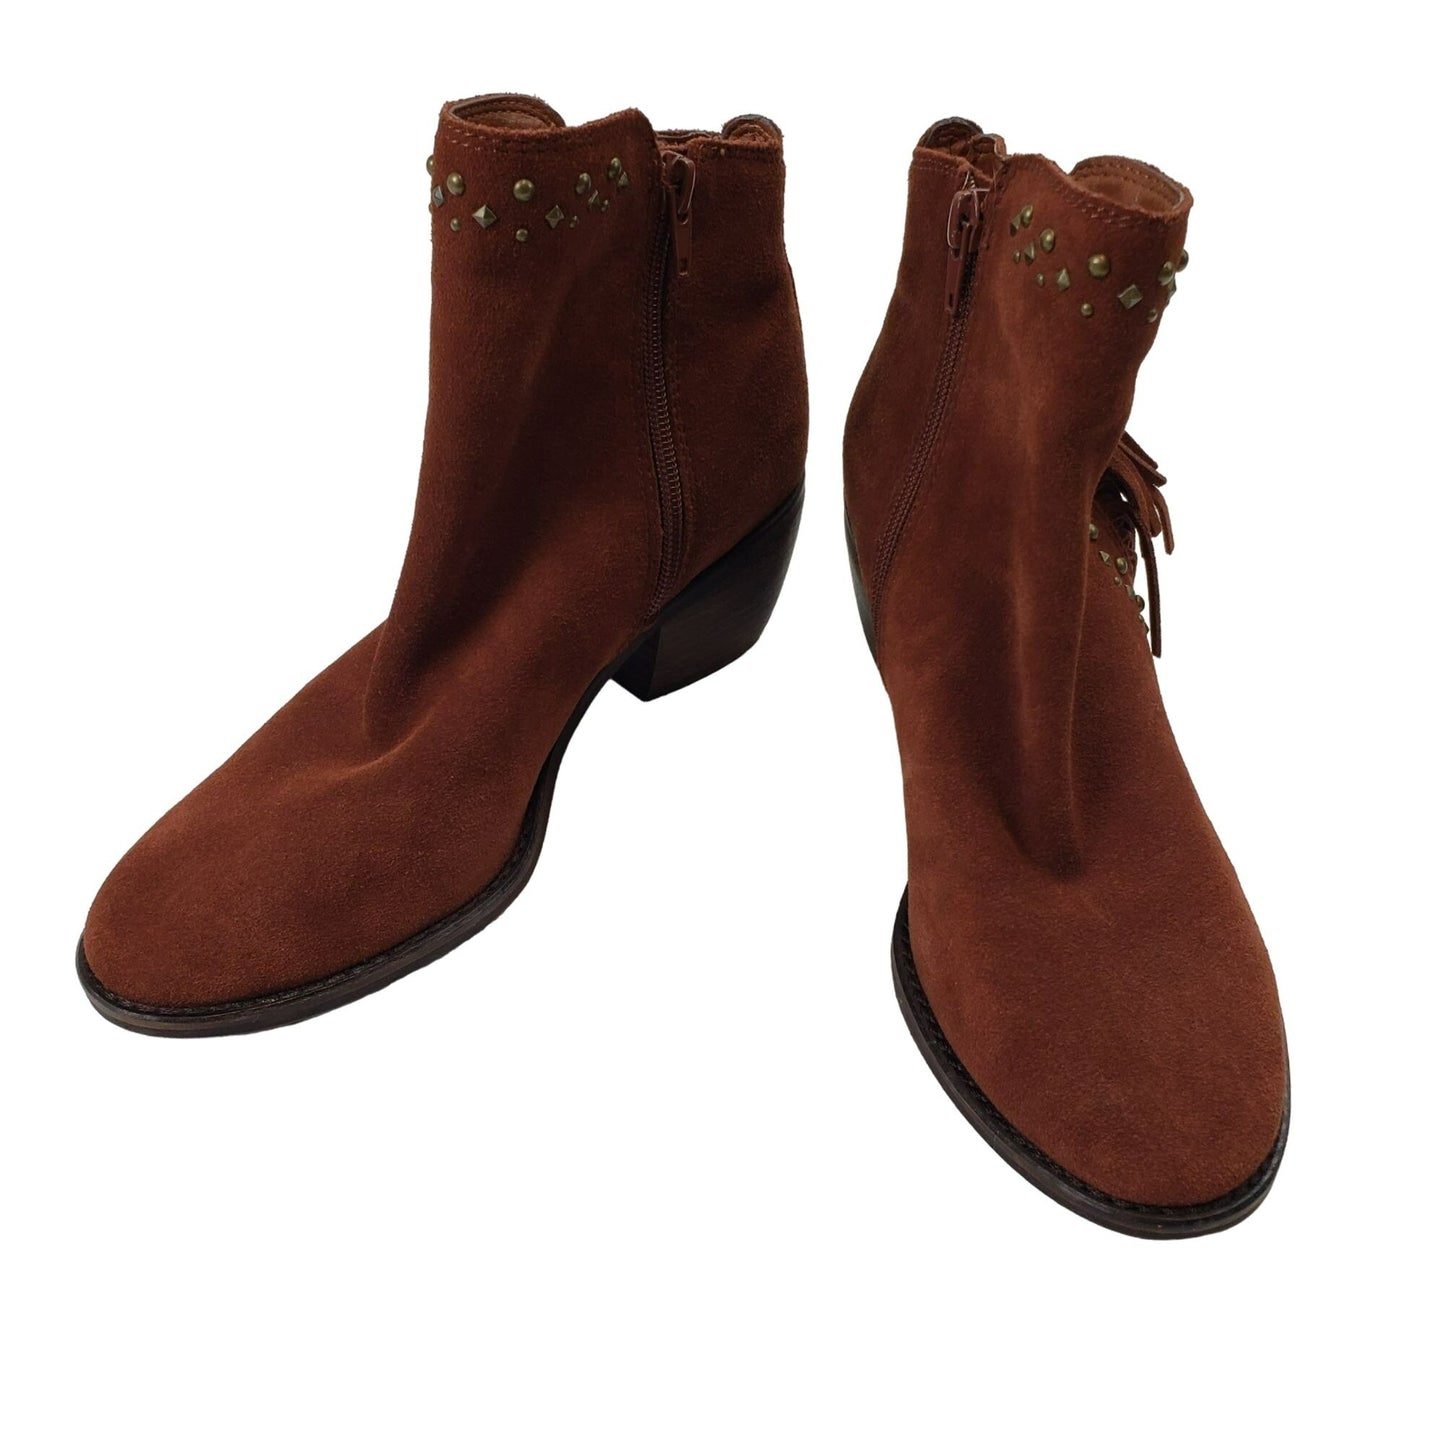 Lucky Brand Kaarina Suede Leather Ankle Boots Size 7.5